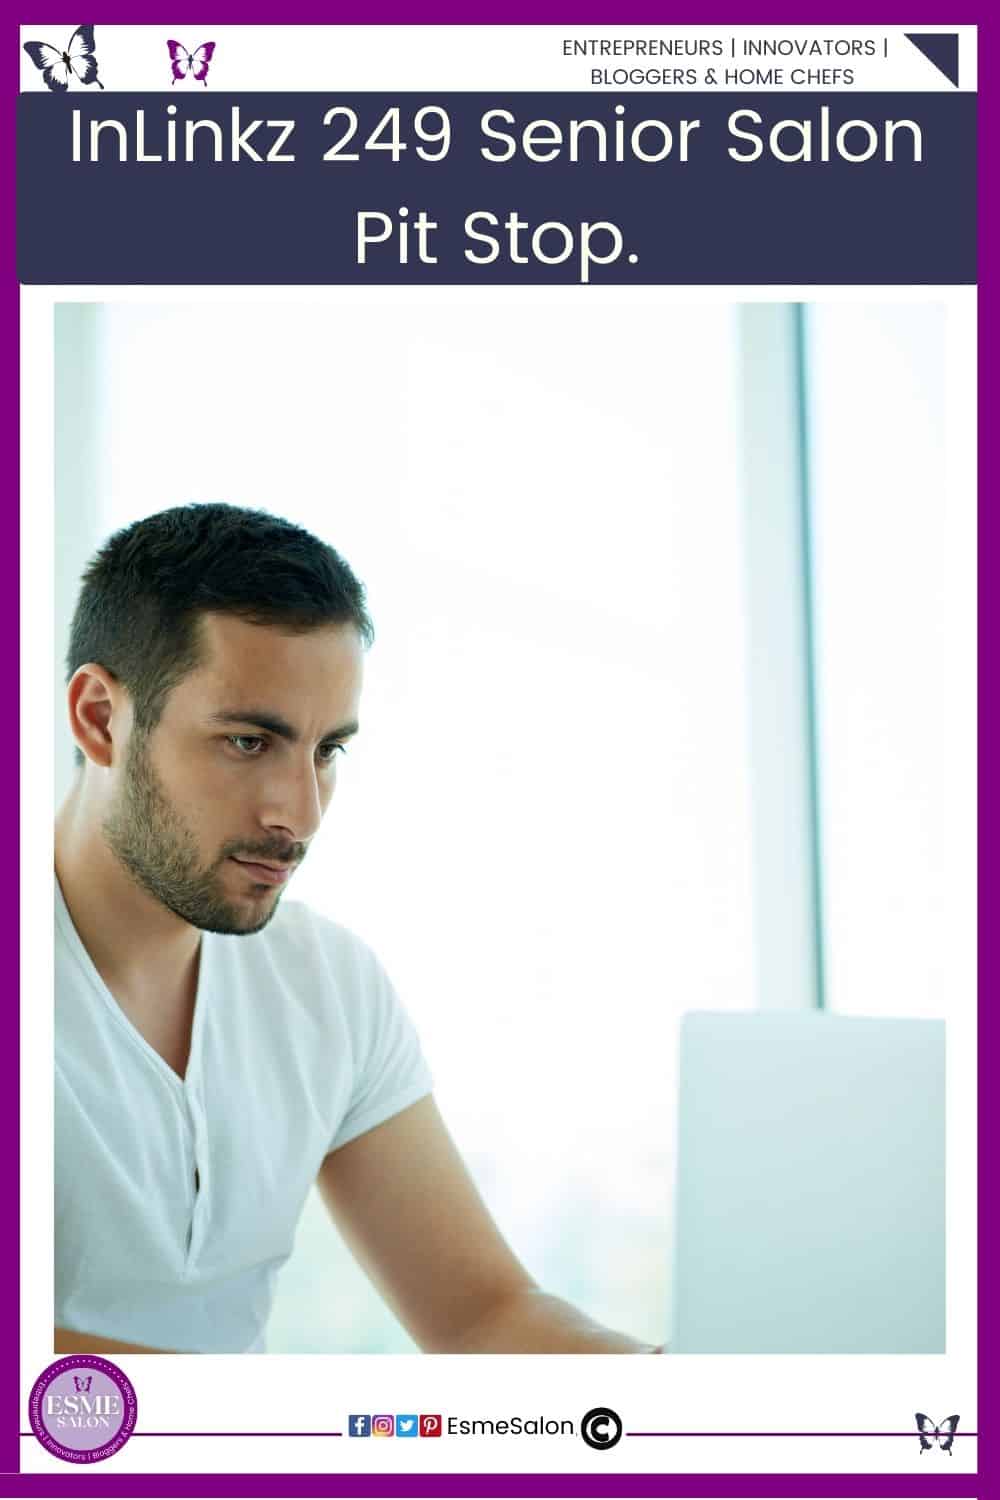 An image of a dark hair man with a white v-neck shirt sitting and working on his computer